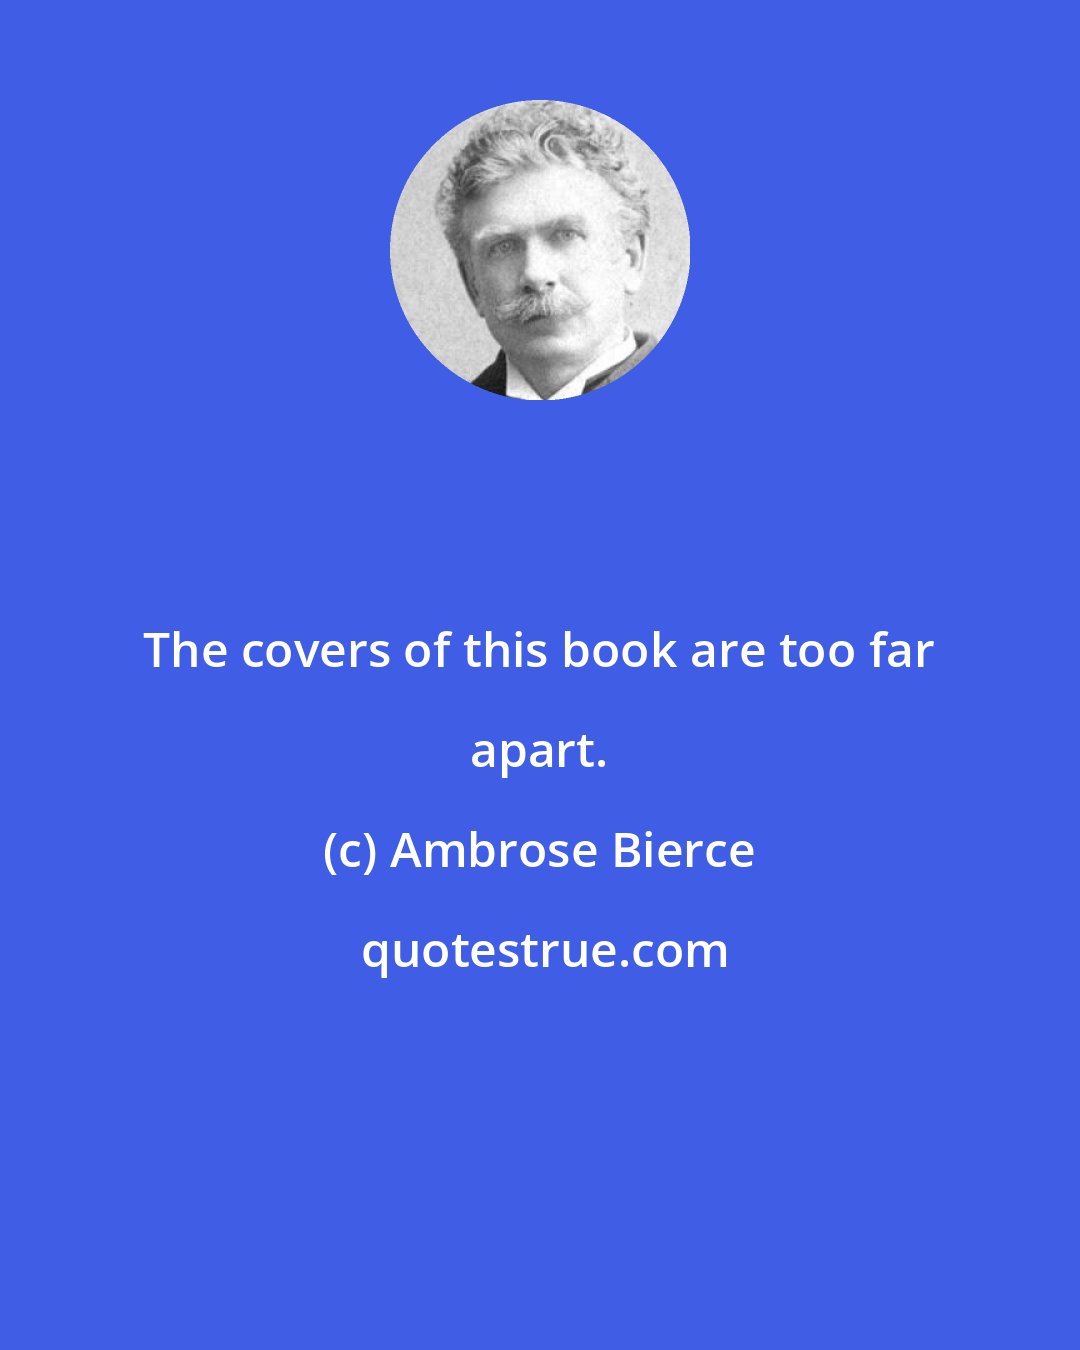 Ambrose Bierce: The covers of this book are too far apart.